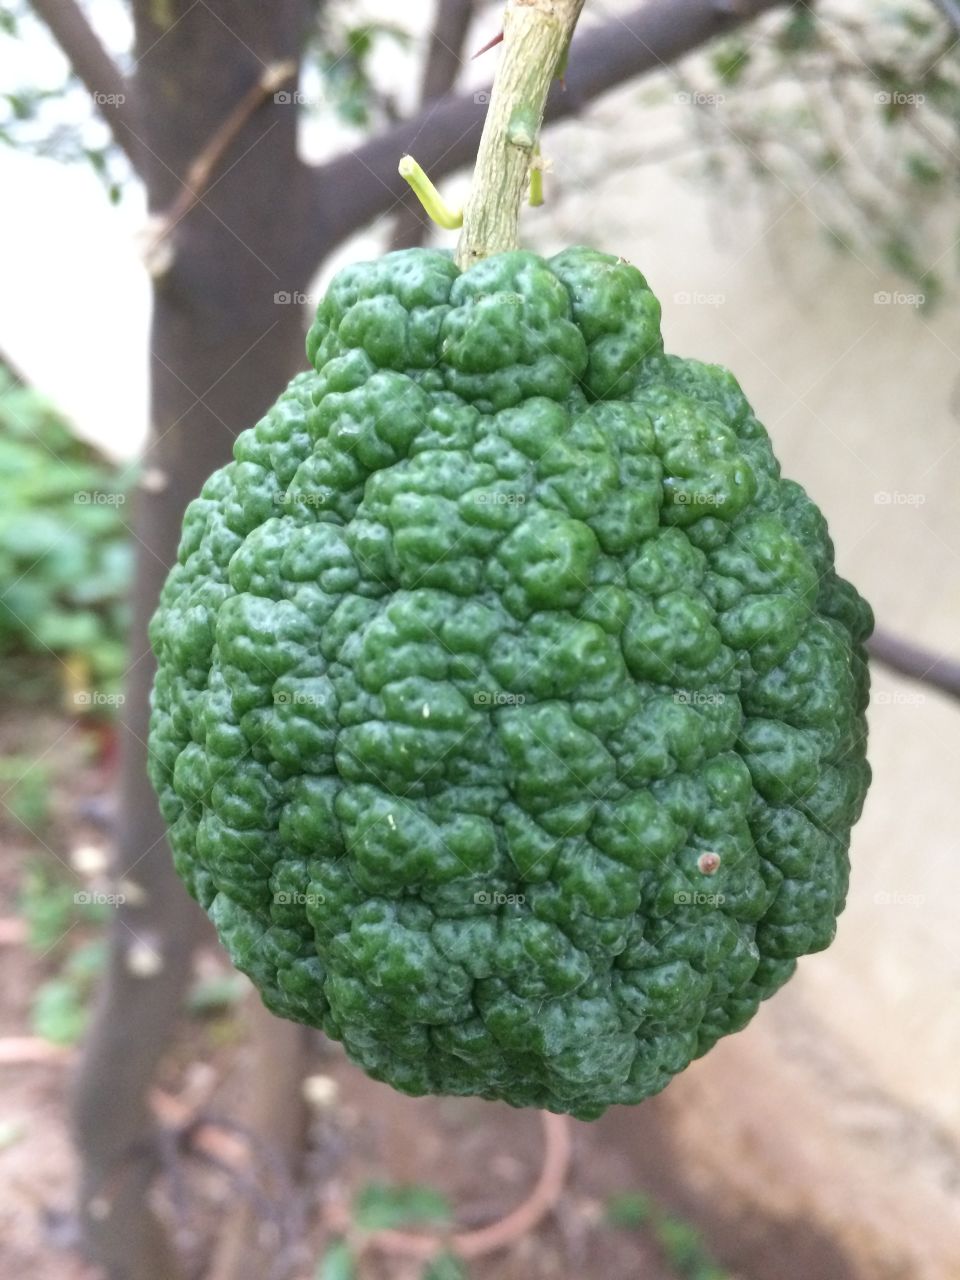 Guess the fruit?